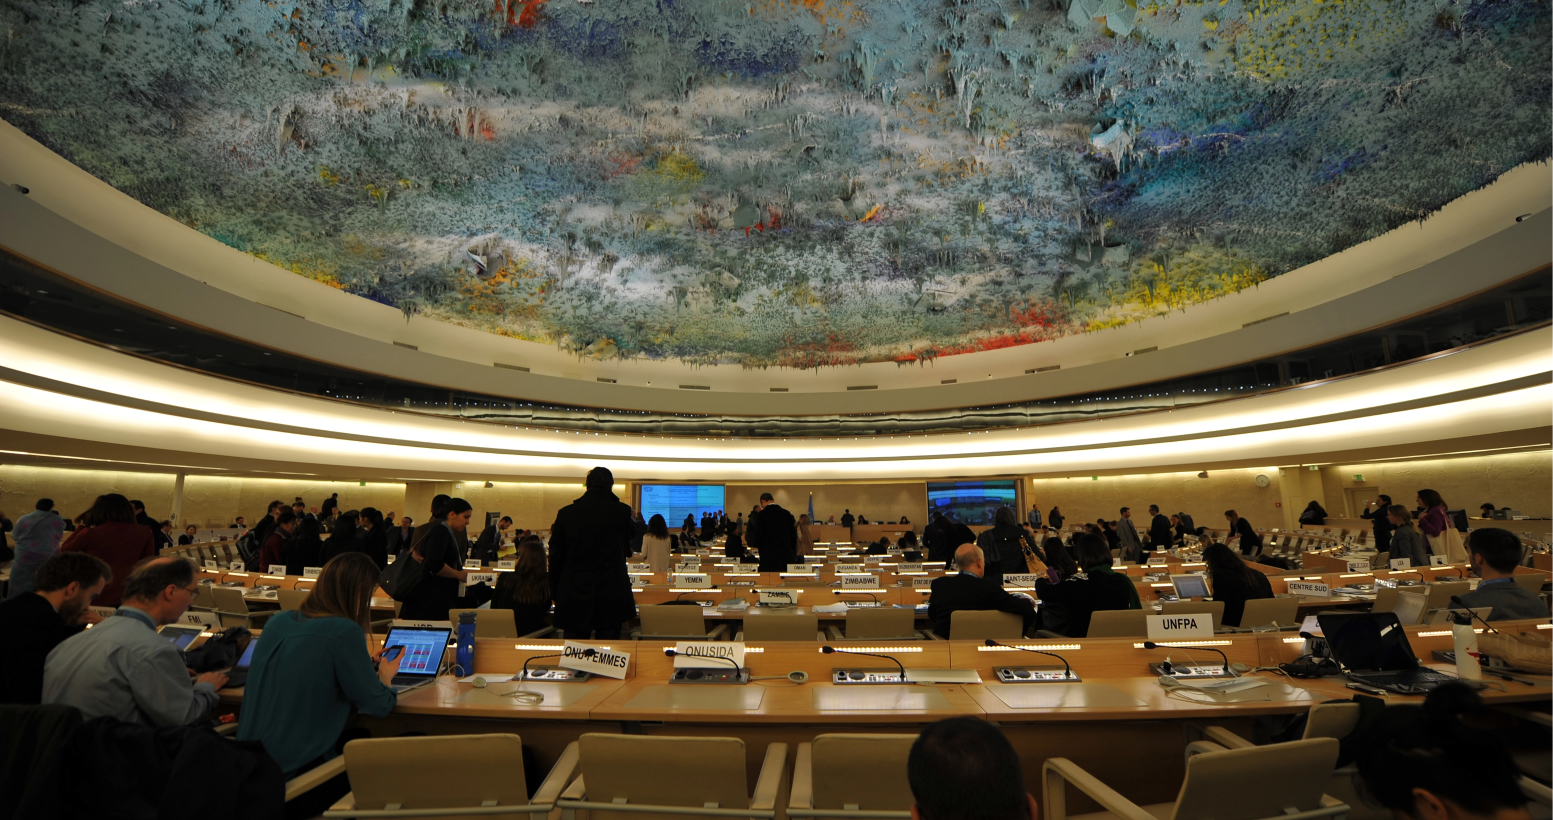 The ceiling of the Human Rights Council, in the Palais des Nations where sessions typically take place. Photo: LWF/C. Kästner 